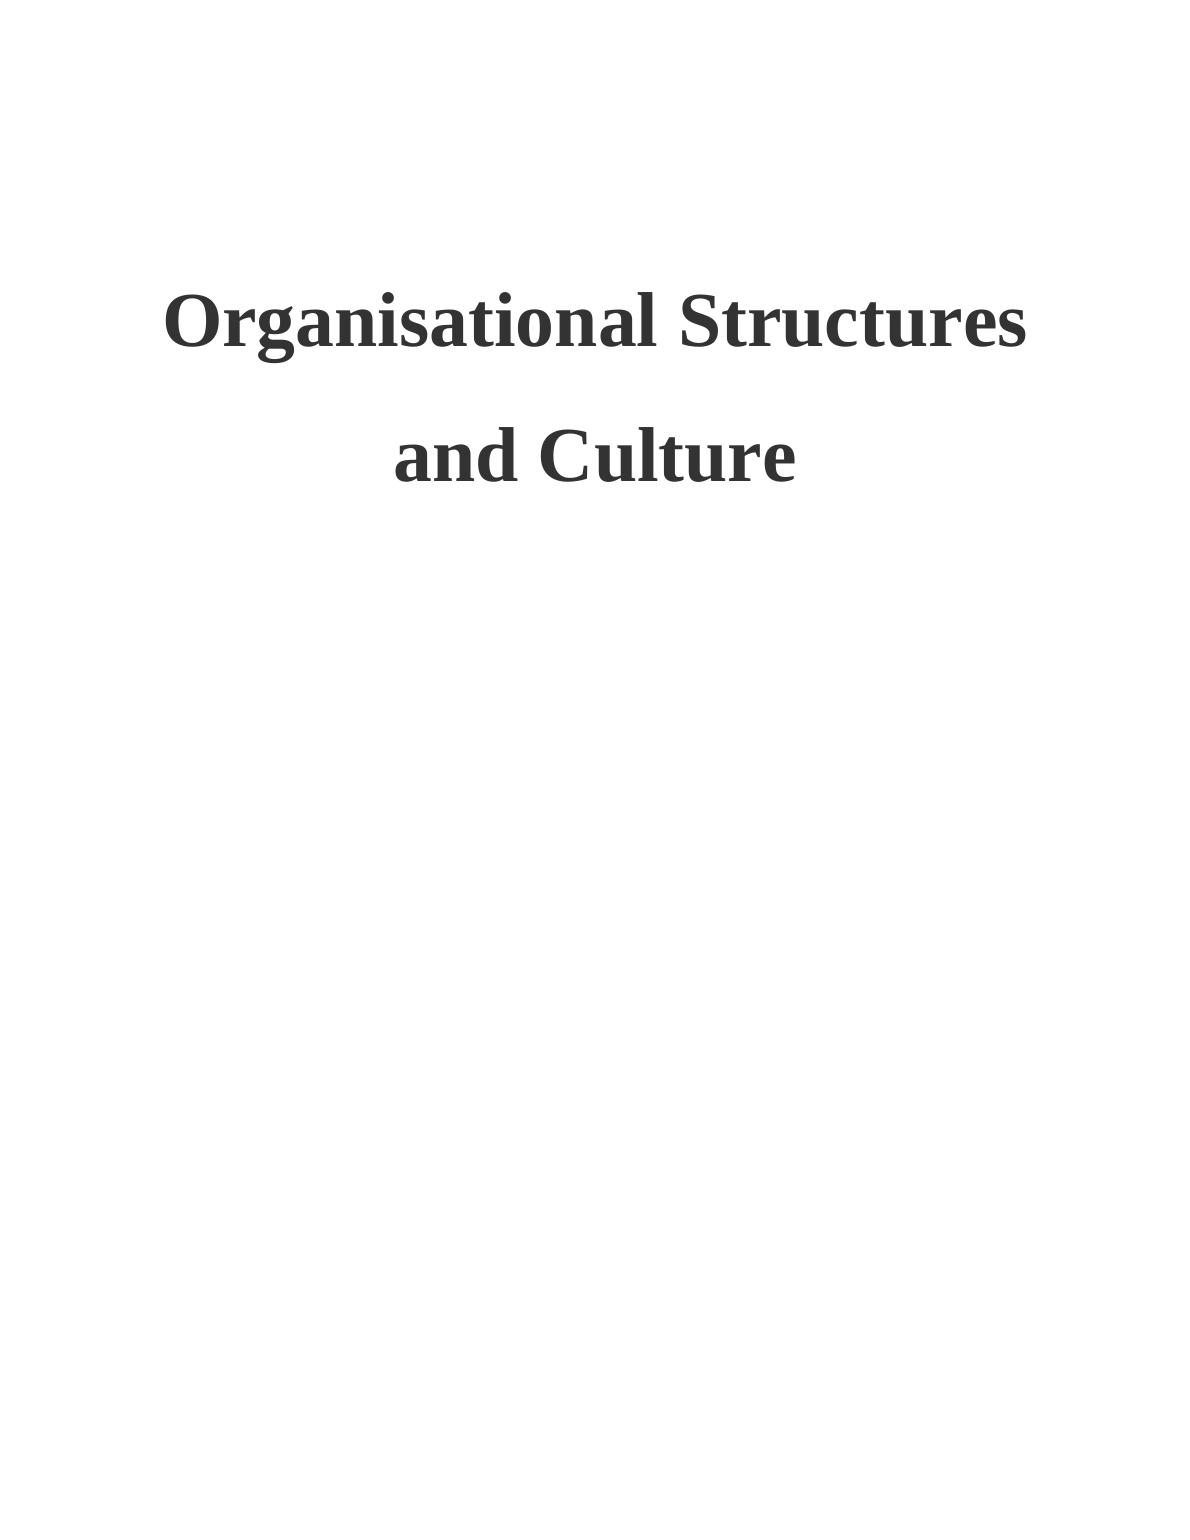 Organisational Structures and Culture - Doc_1